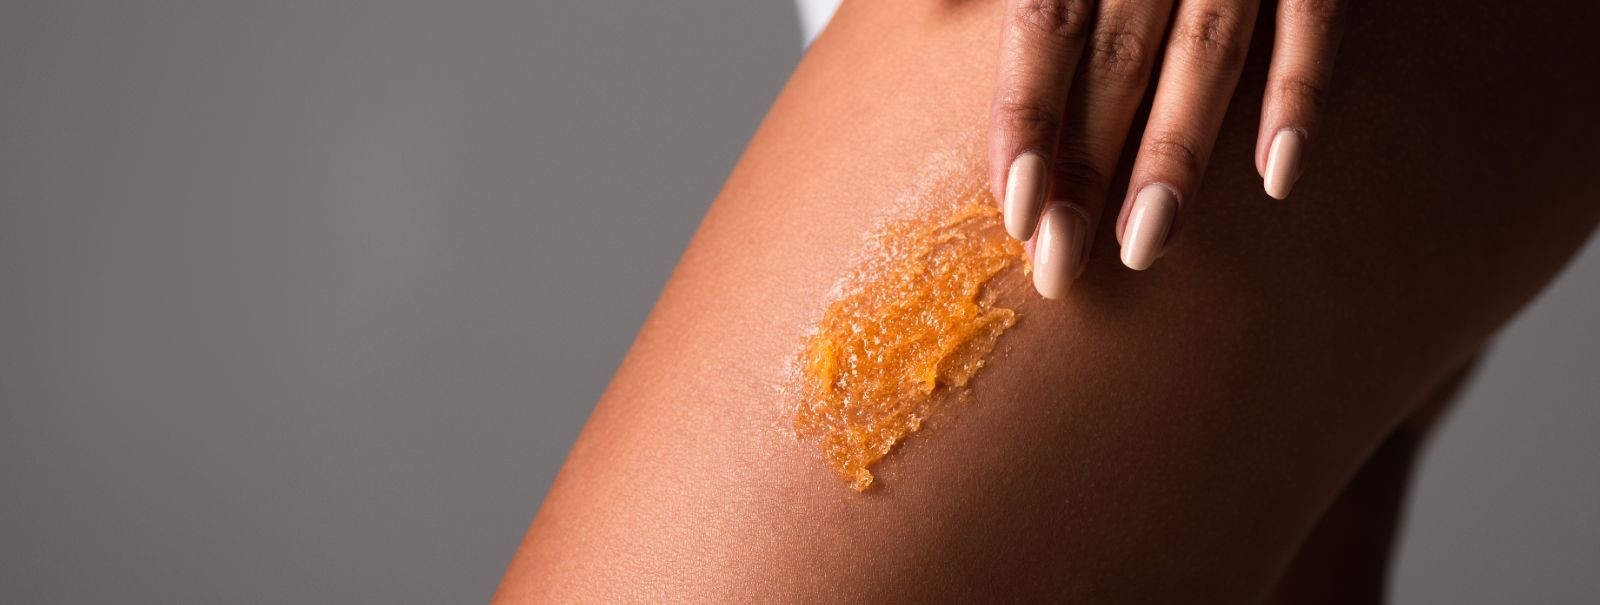 Body sugaring is a natural and gentle method of hair removal that has been used for centuries. Unlike traditional waxing, sugaring uses a paste made from sugar,